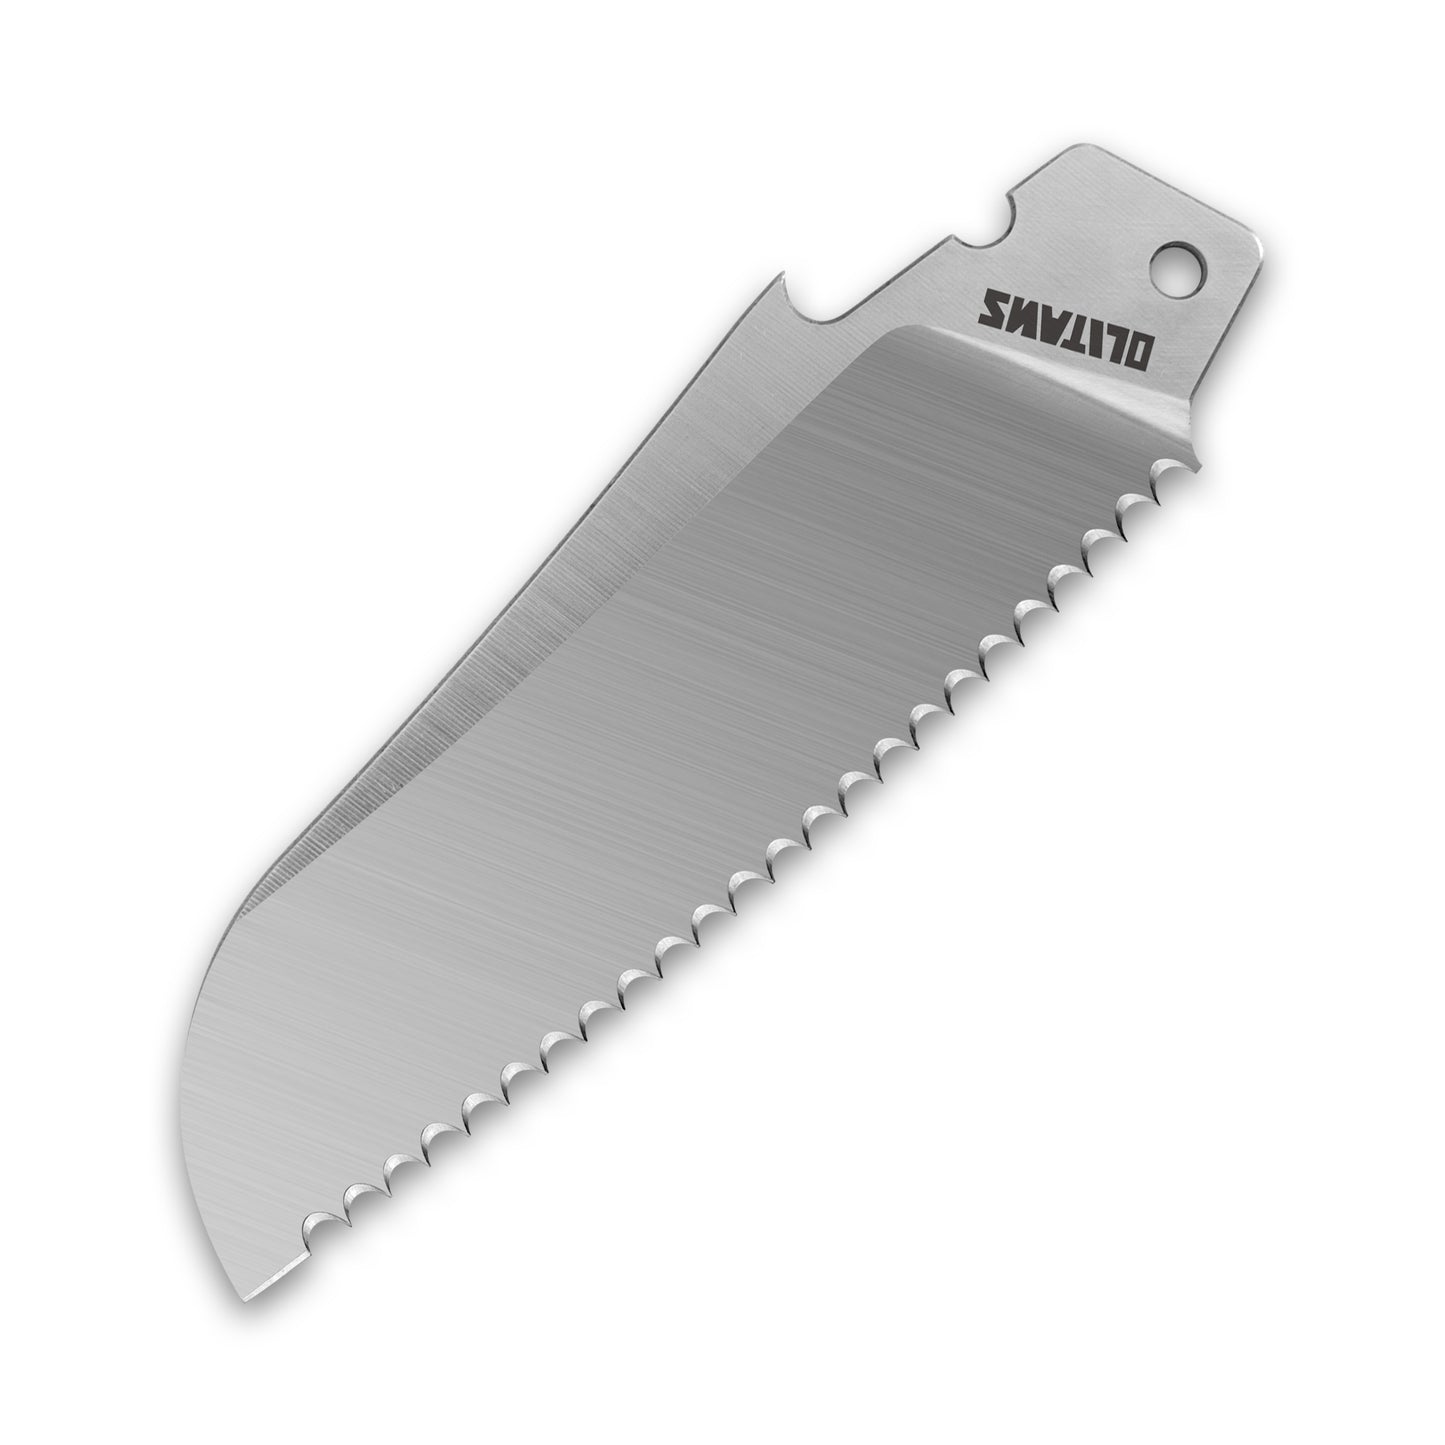 T024 3" Replacement Knife Blades, Tanto, Razor, Drop Point, Serrated Blade